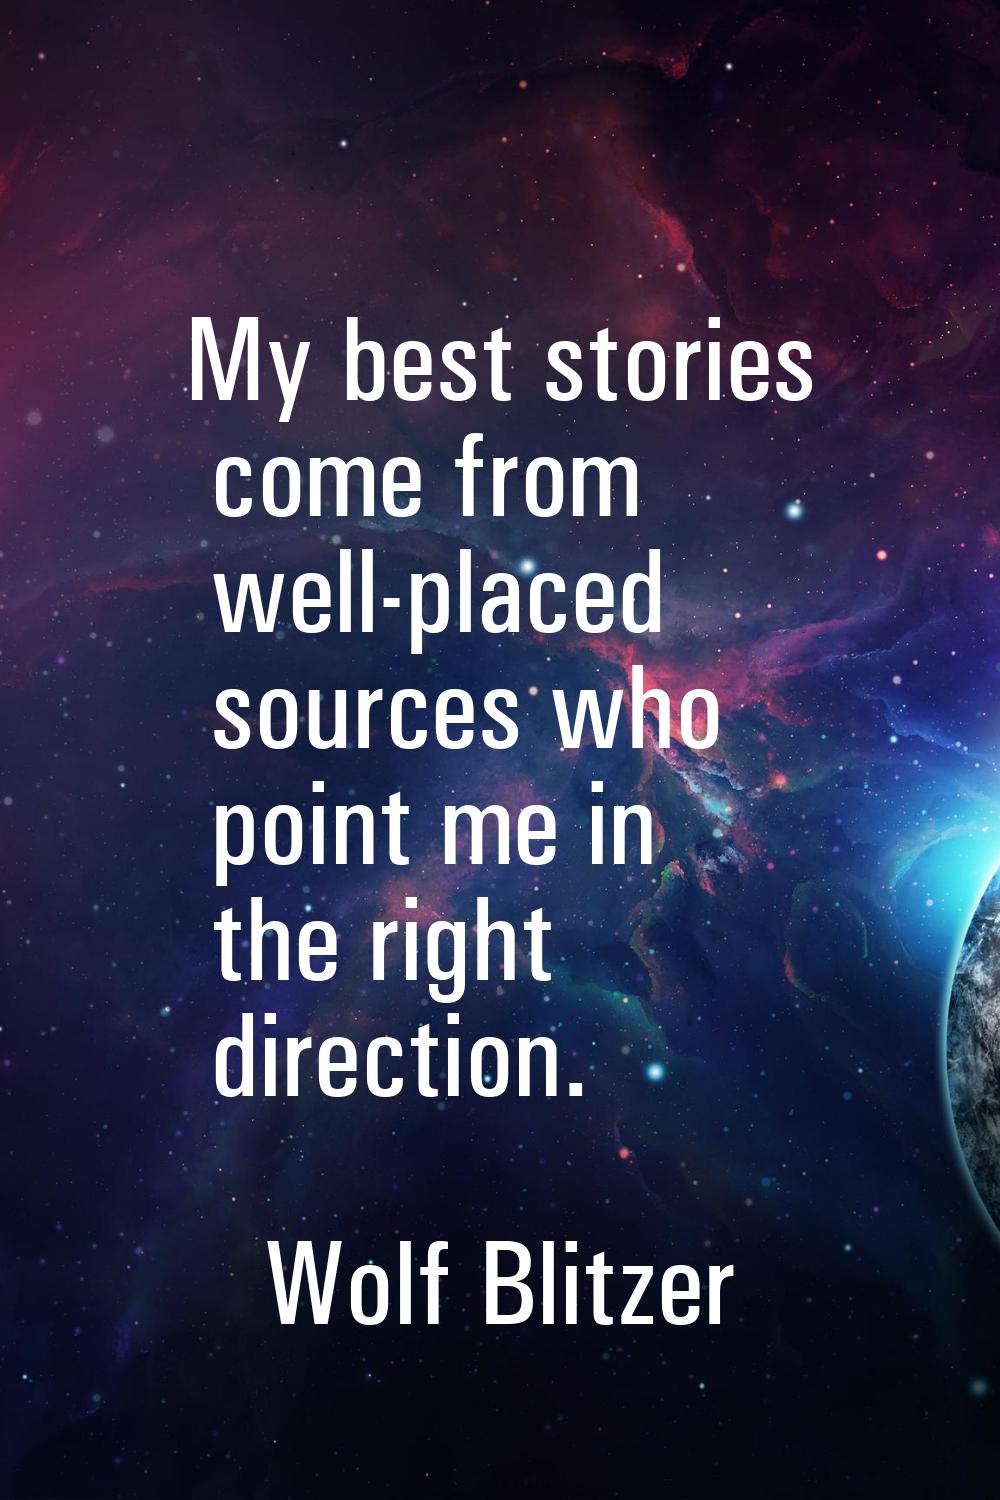 My best stories come from well-placed sources who point me in the right direction.